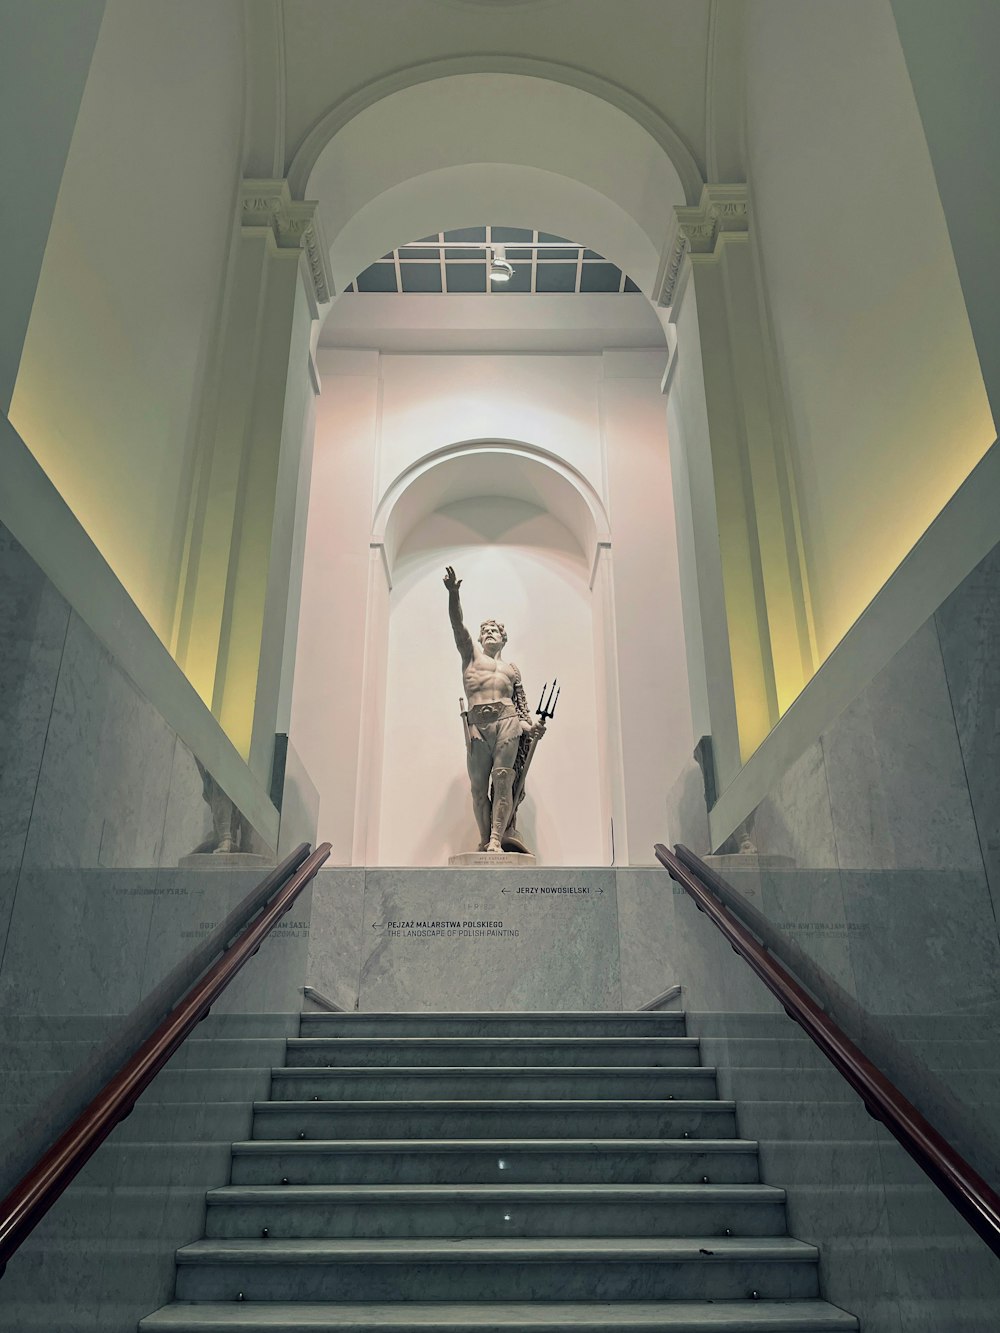 a statue of a person on a staircase